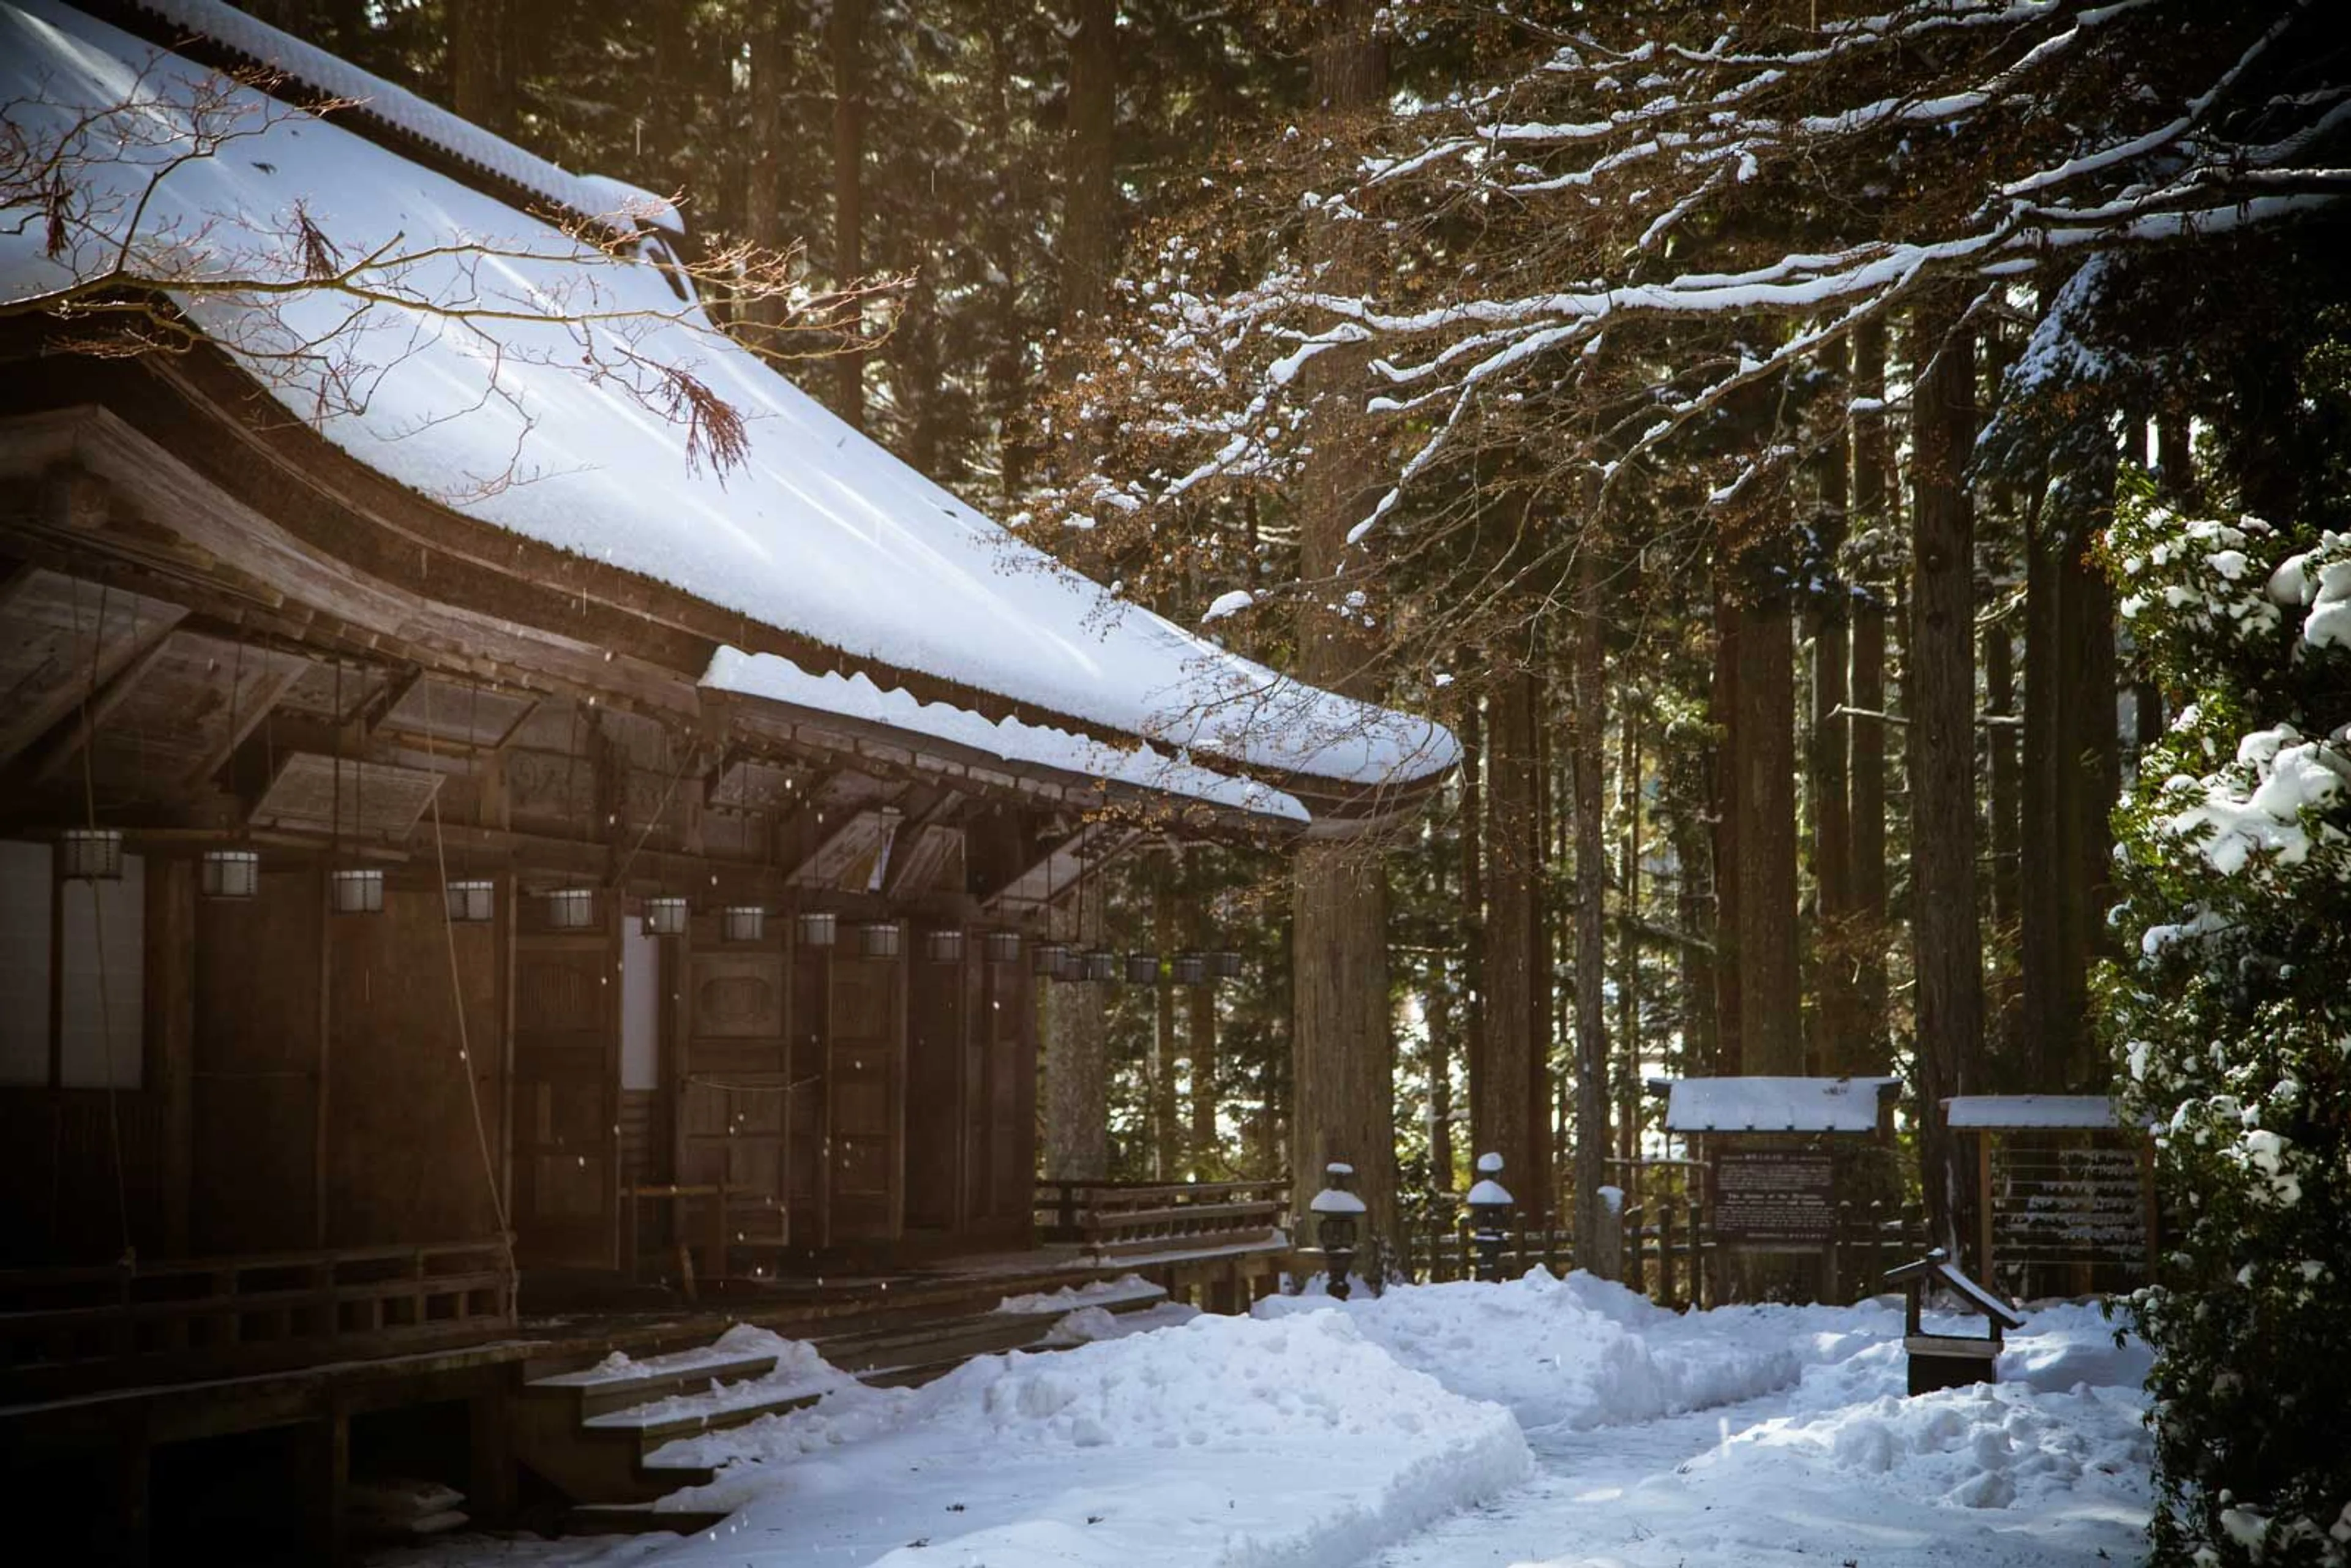 Snow falls from the rooftop of a temple in the Kongobu-ji complex in Koyasan.